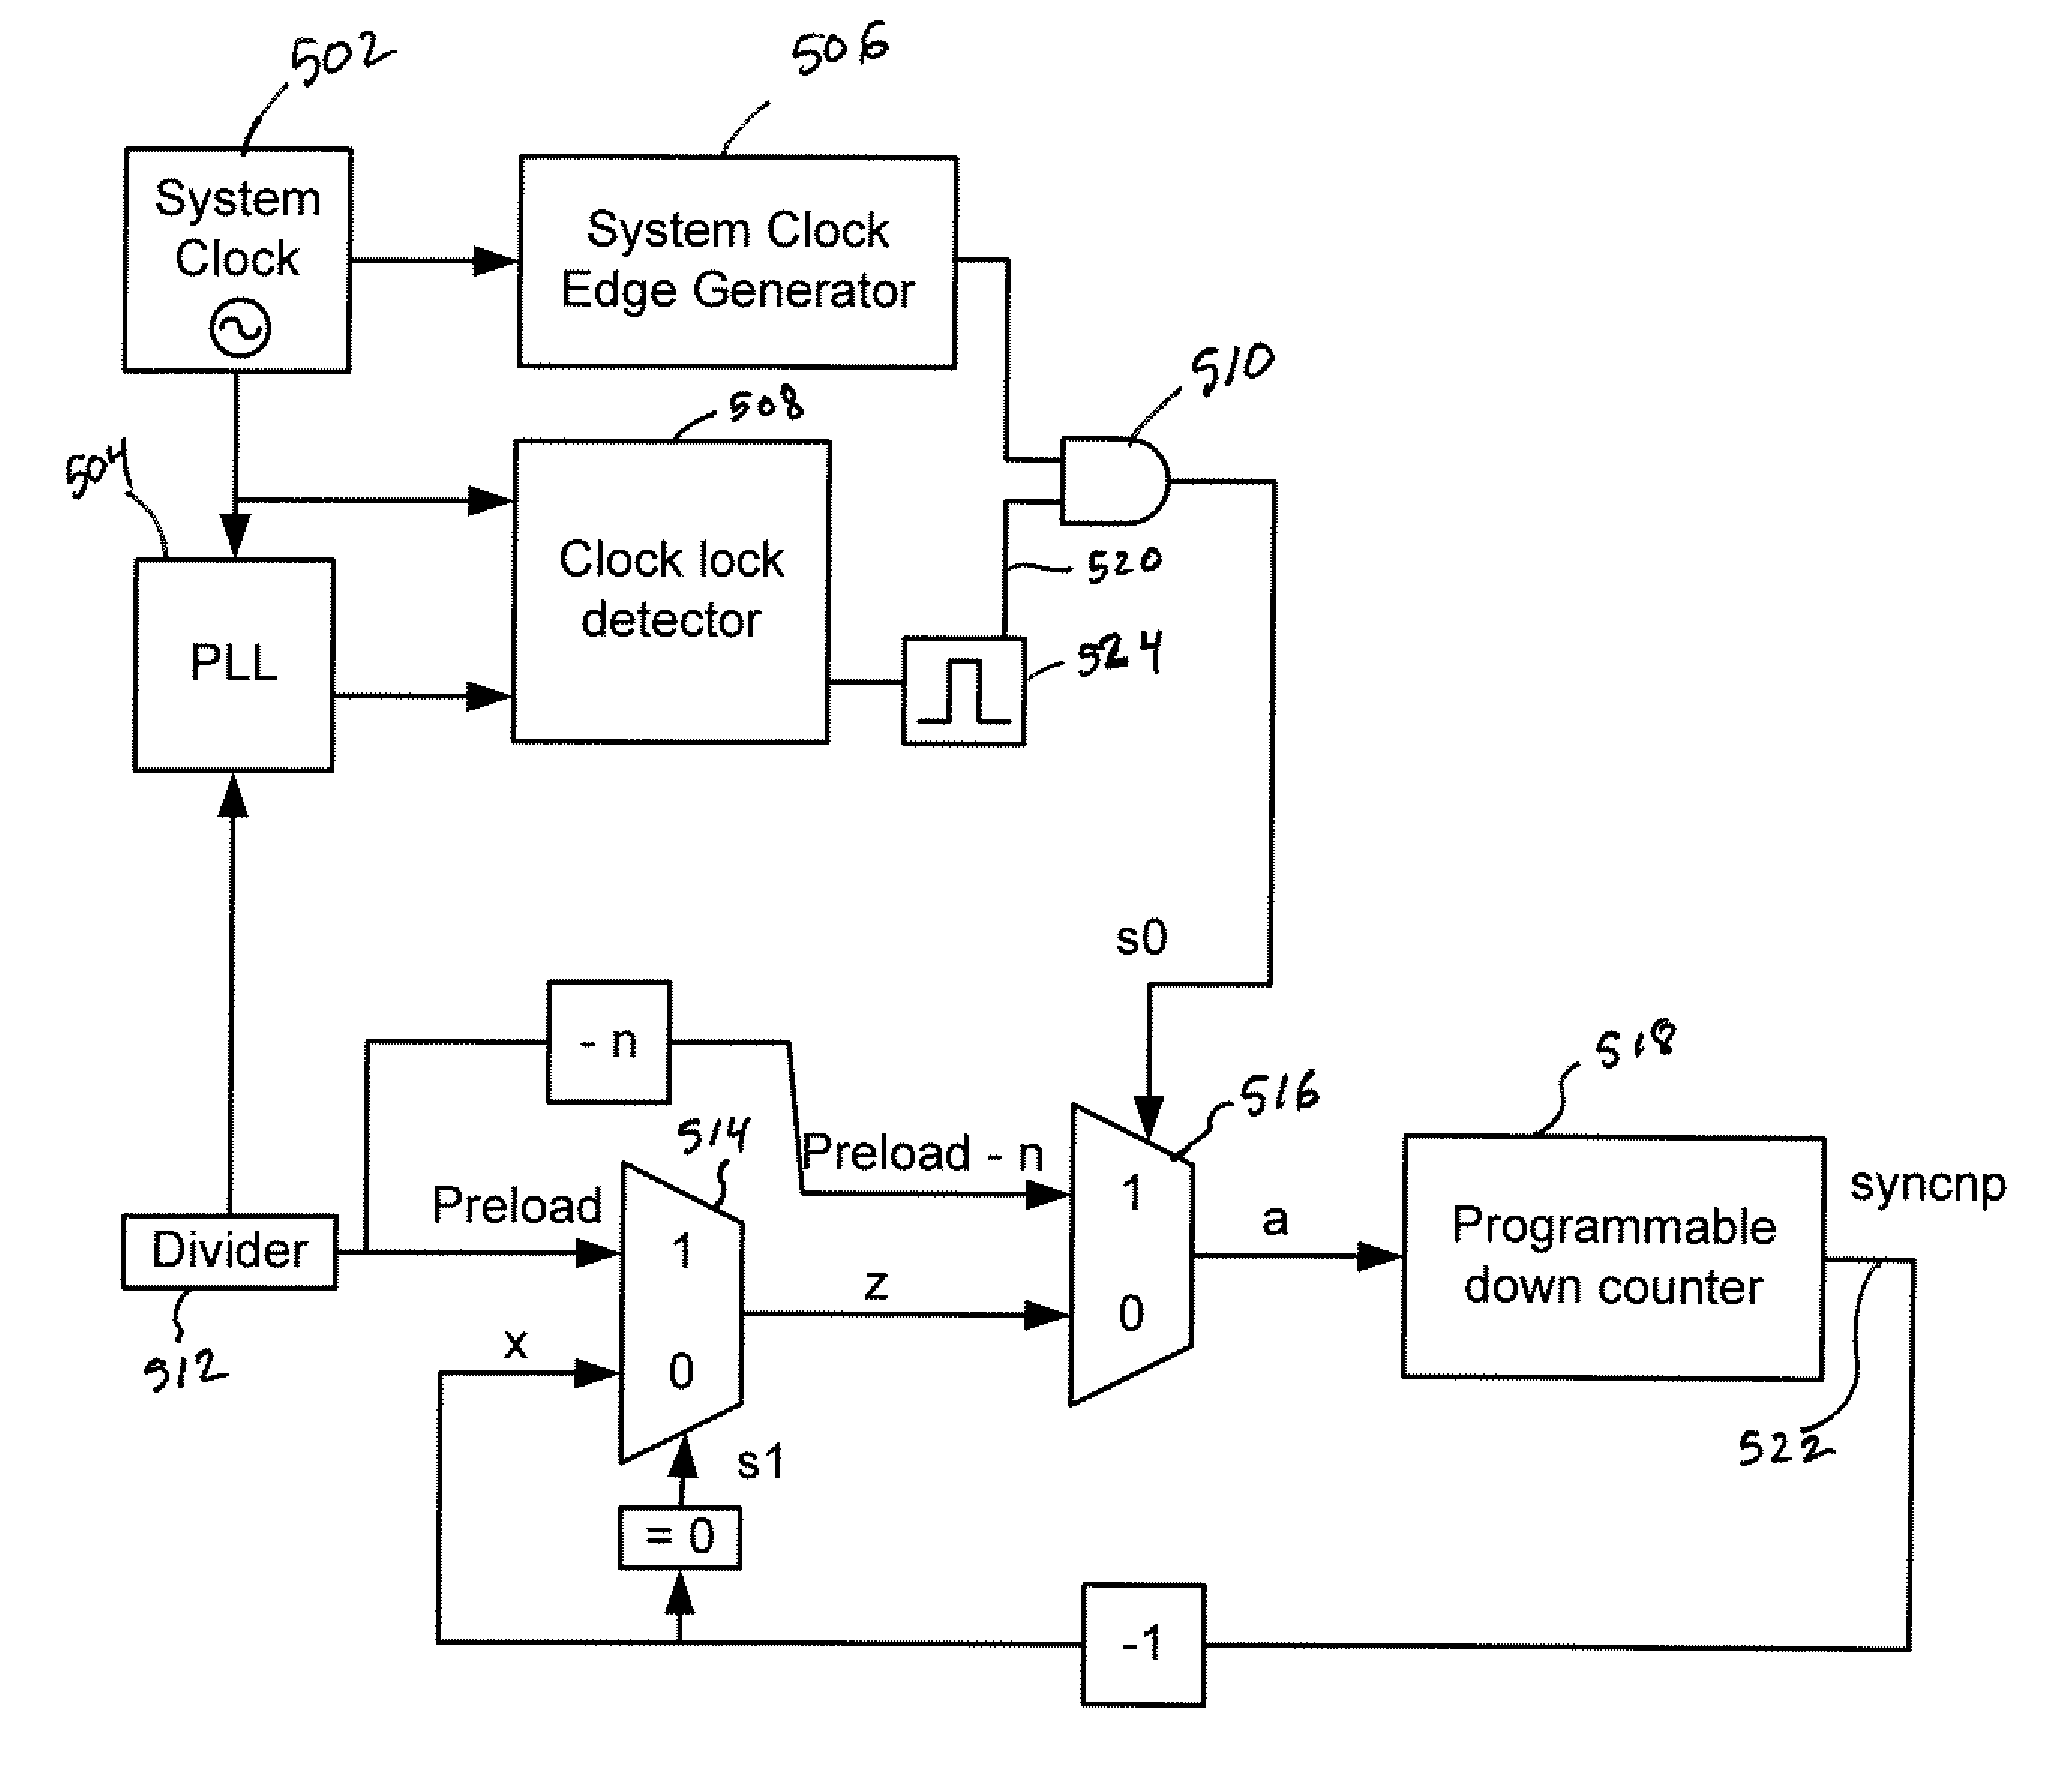 Method and apparatus to generate system clock synchronization pulses using a pll lock detect signal